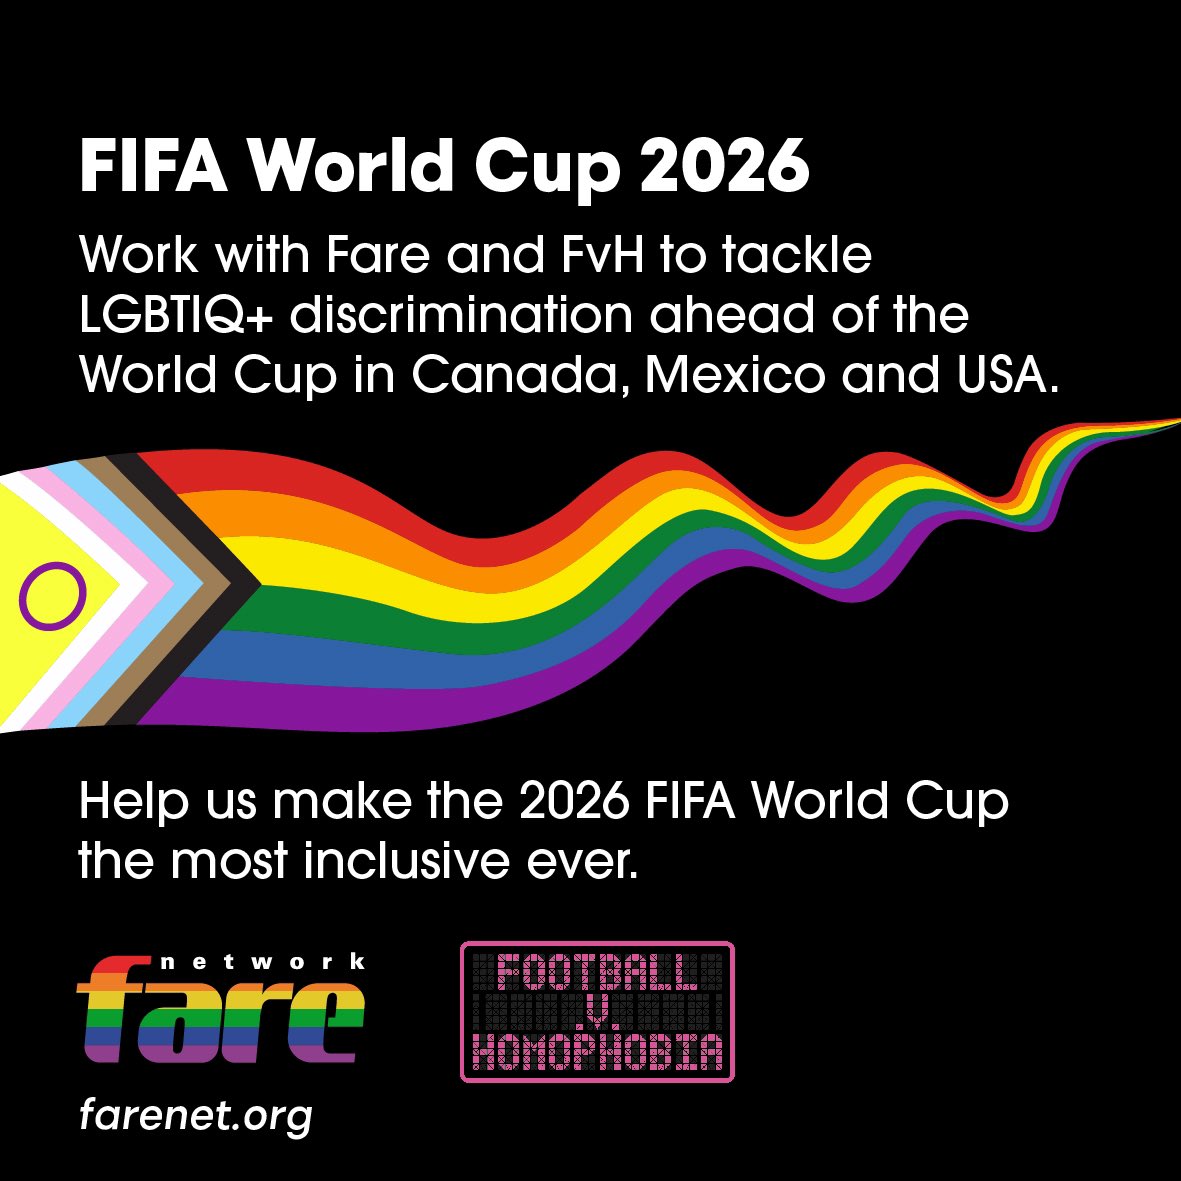 This #IDAHOBIT Fare is proud to announce an initiative in the run-up to the World Cup in USA, Mexico and Canada. Together with our friends @FvHtweets we are offering grants to support LGBTIQ+ organisations in the host countries and Europe to work together.